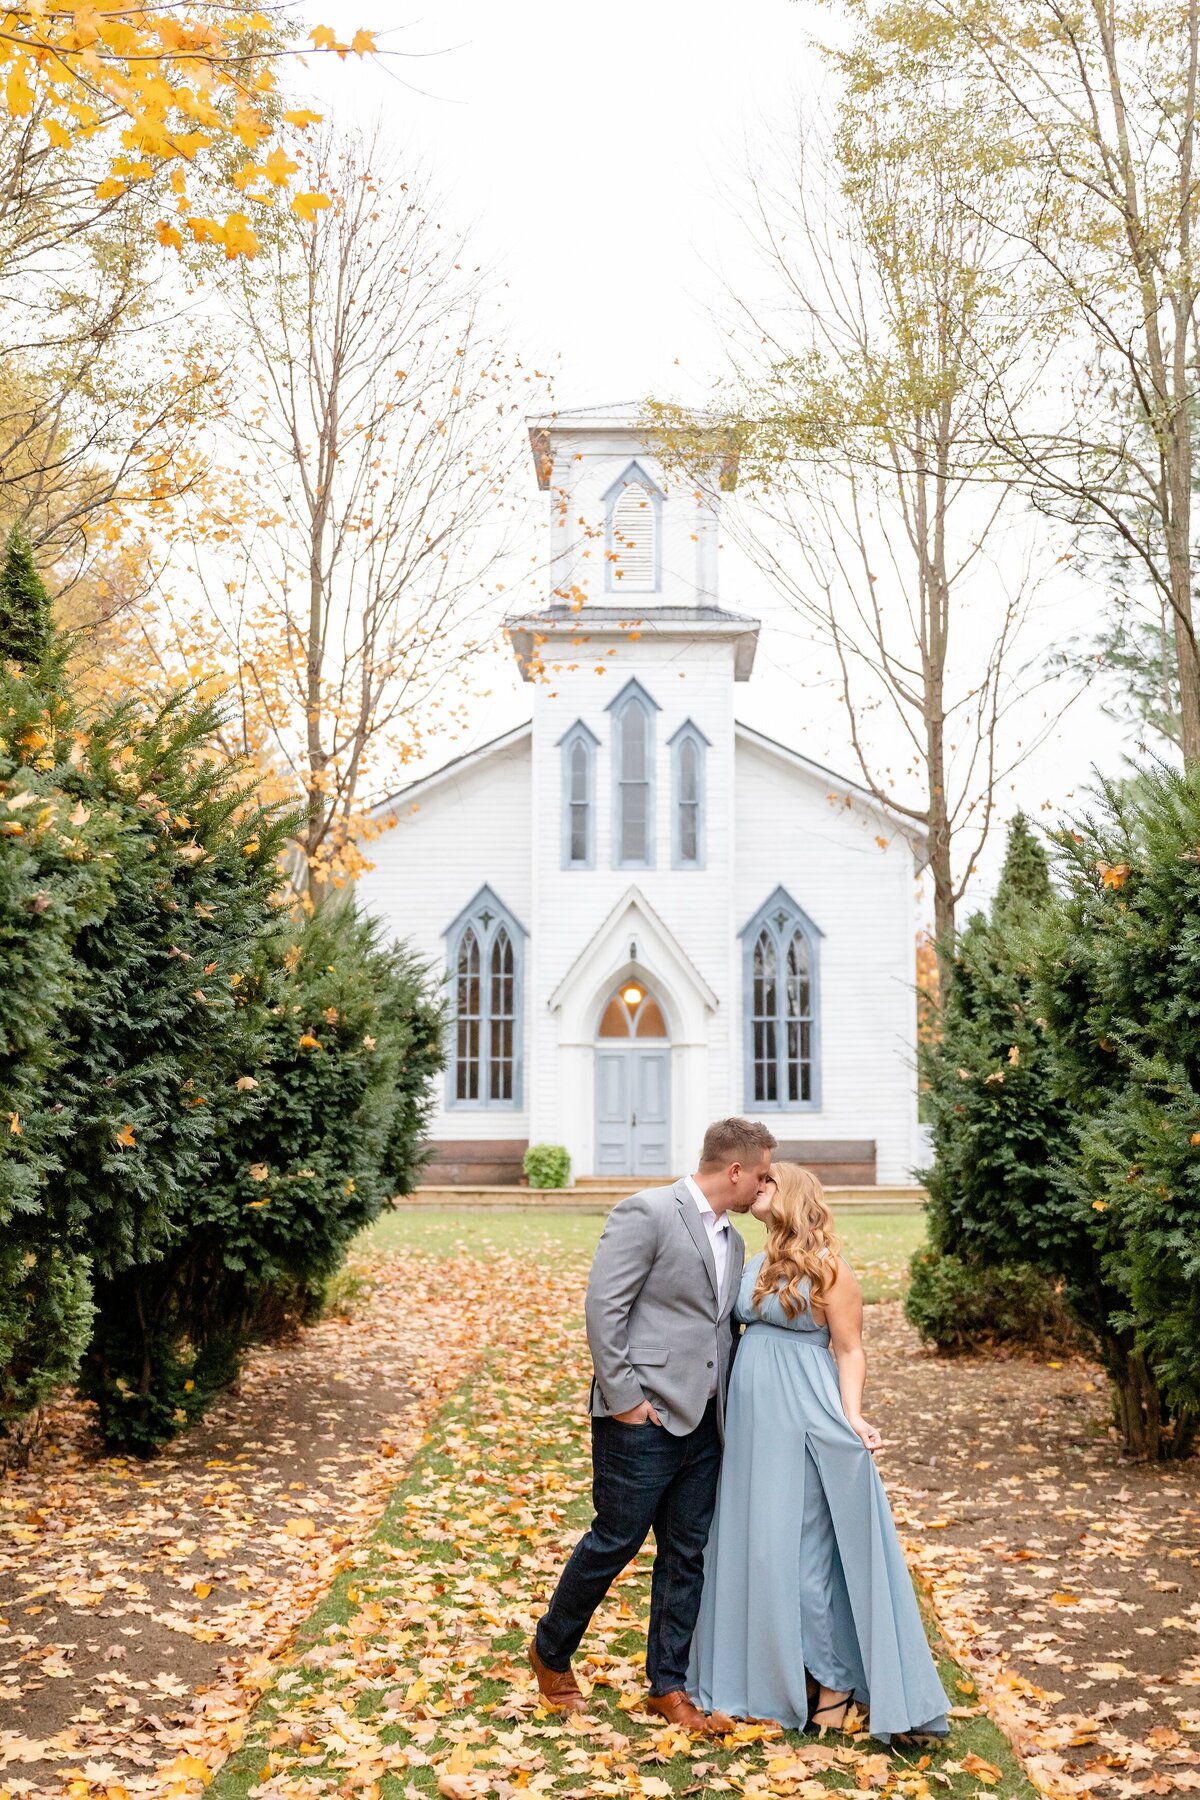 Guy-kisses-his-fiance-in-front-of-the-Cranberry-Creek-Gardens-Chapel-during-their-fall-engagement-session